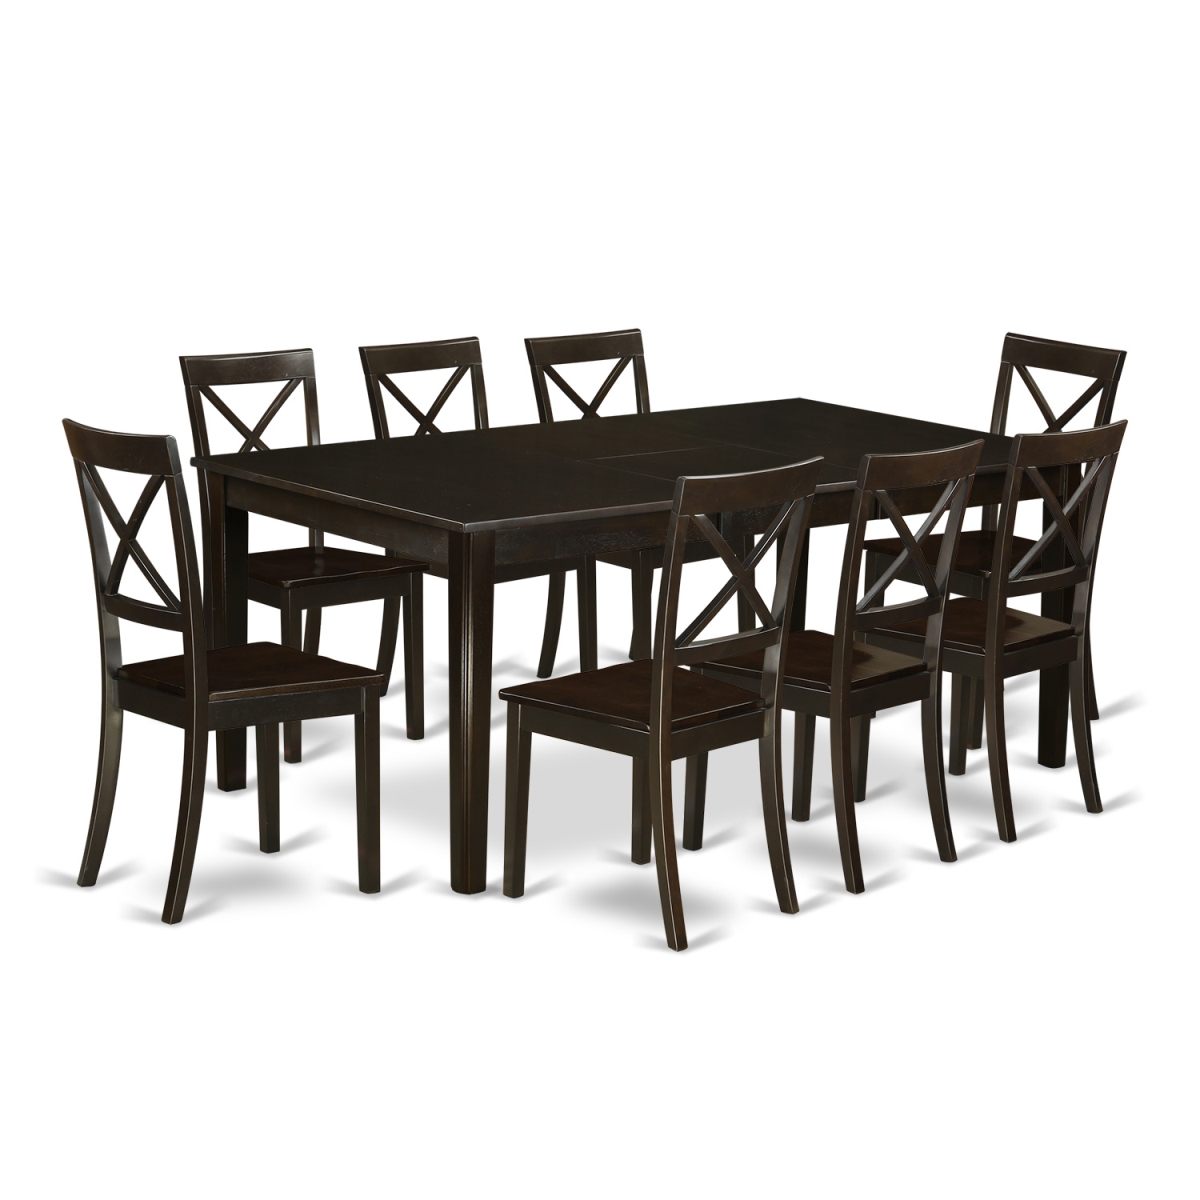 HEBO9-CAP-W Dining Room Set-Dinette Table with Leaf & 8 Dinette Chairs, 9 piece - Cappuccino -  East West Furniture